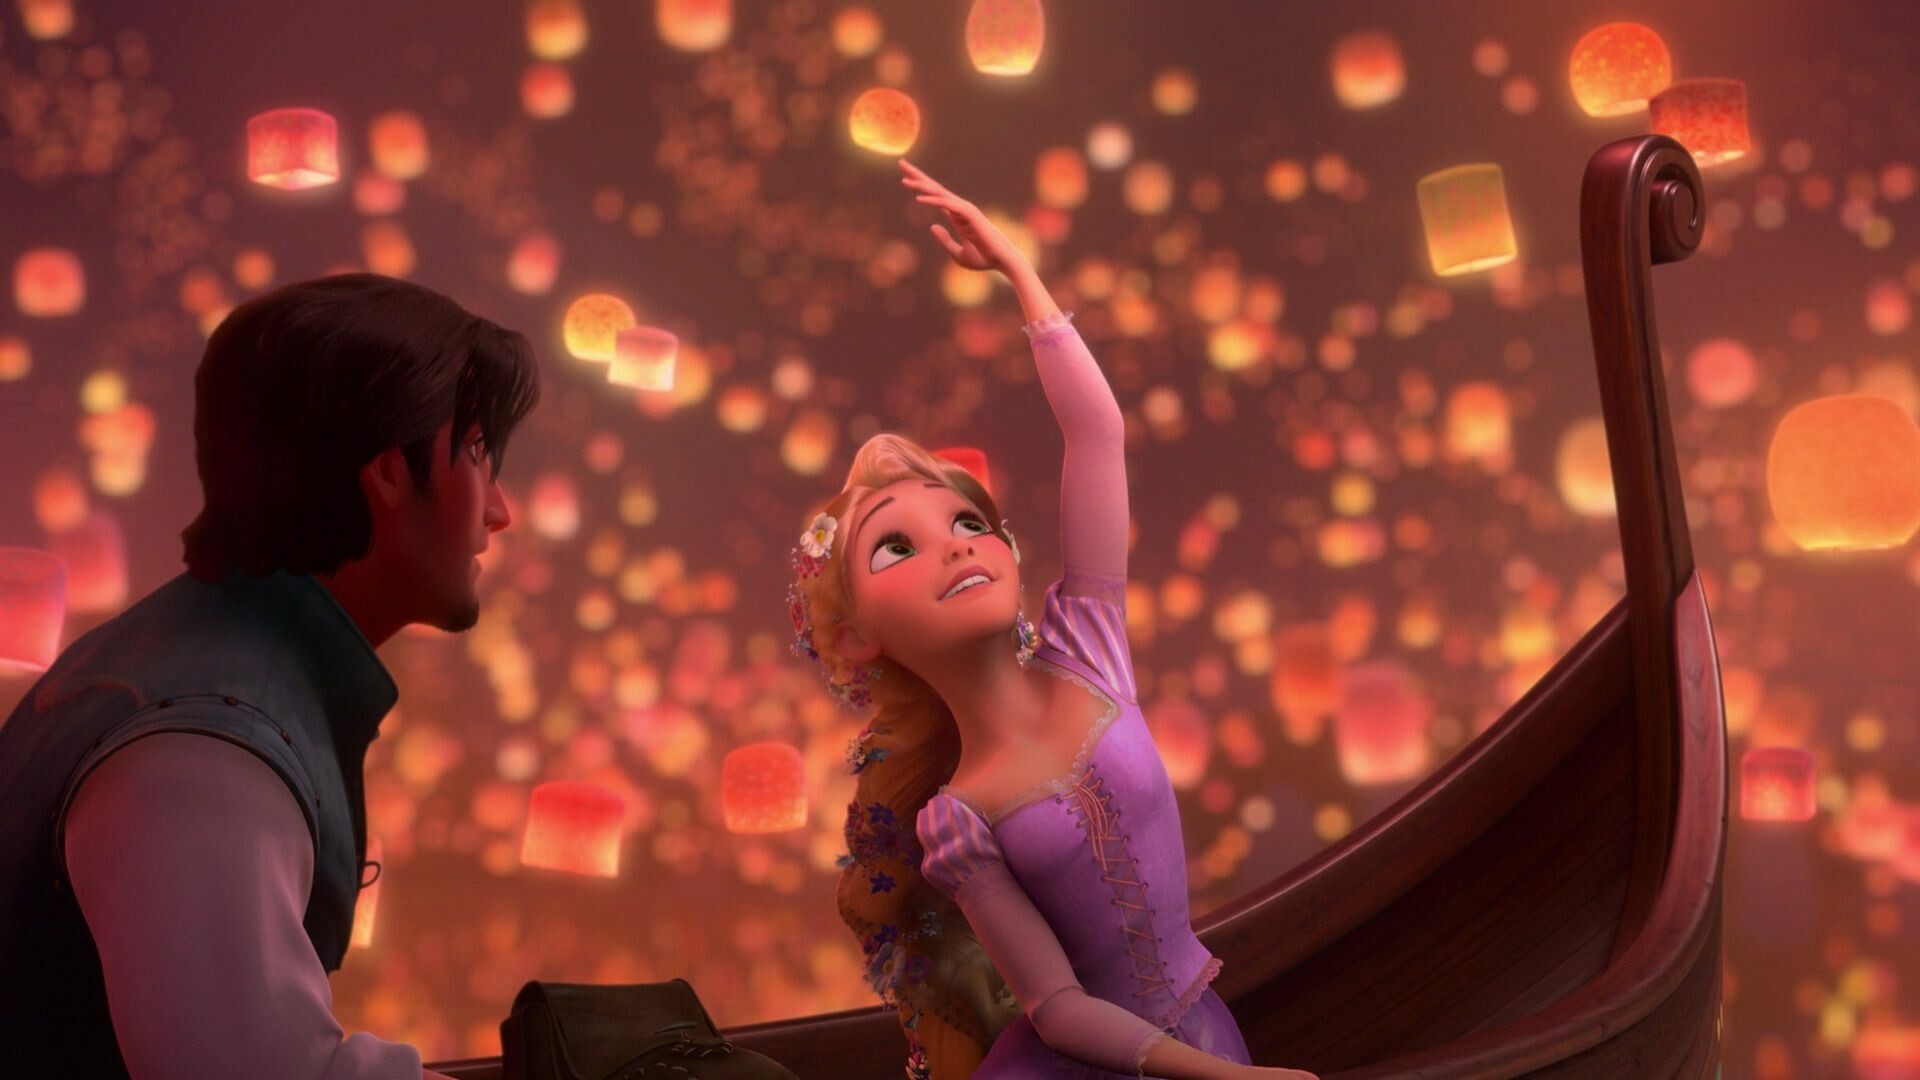 Tangled: Disney's film, Nominated for a number of awards, including Best Original Song at the 83rd Academy Awards. 1920x1080 Full HD Wallpaper.